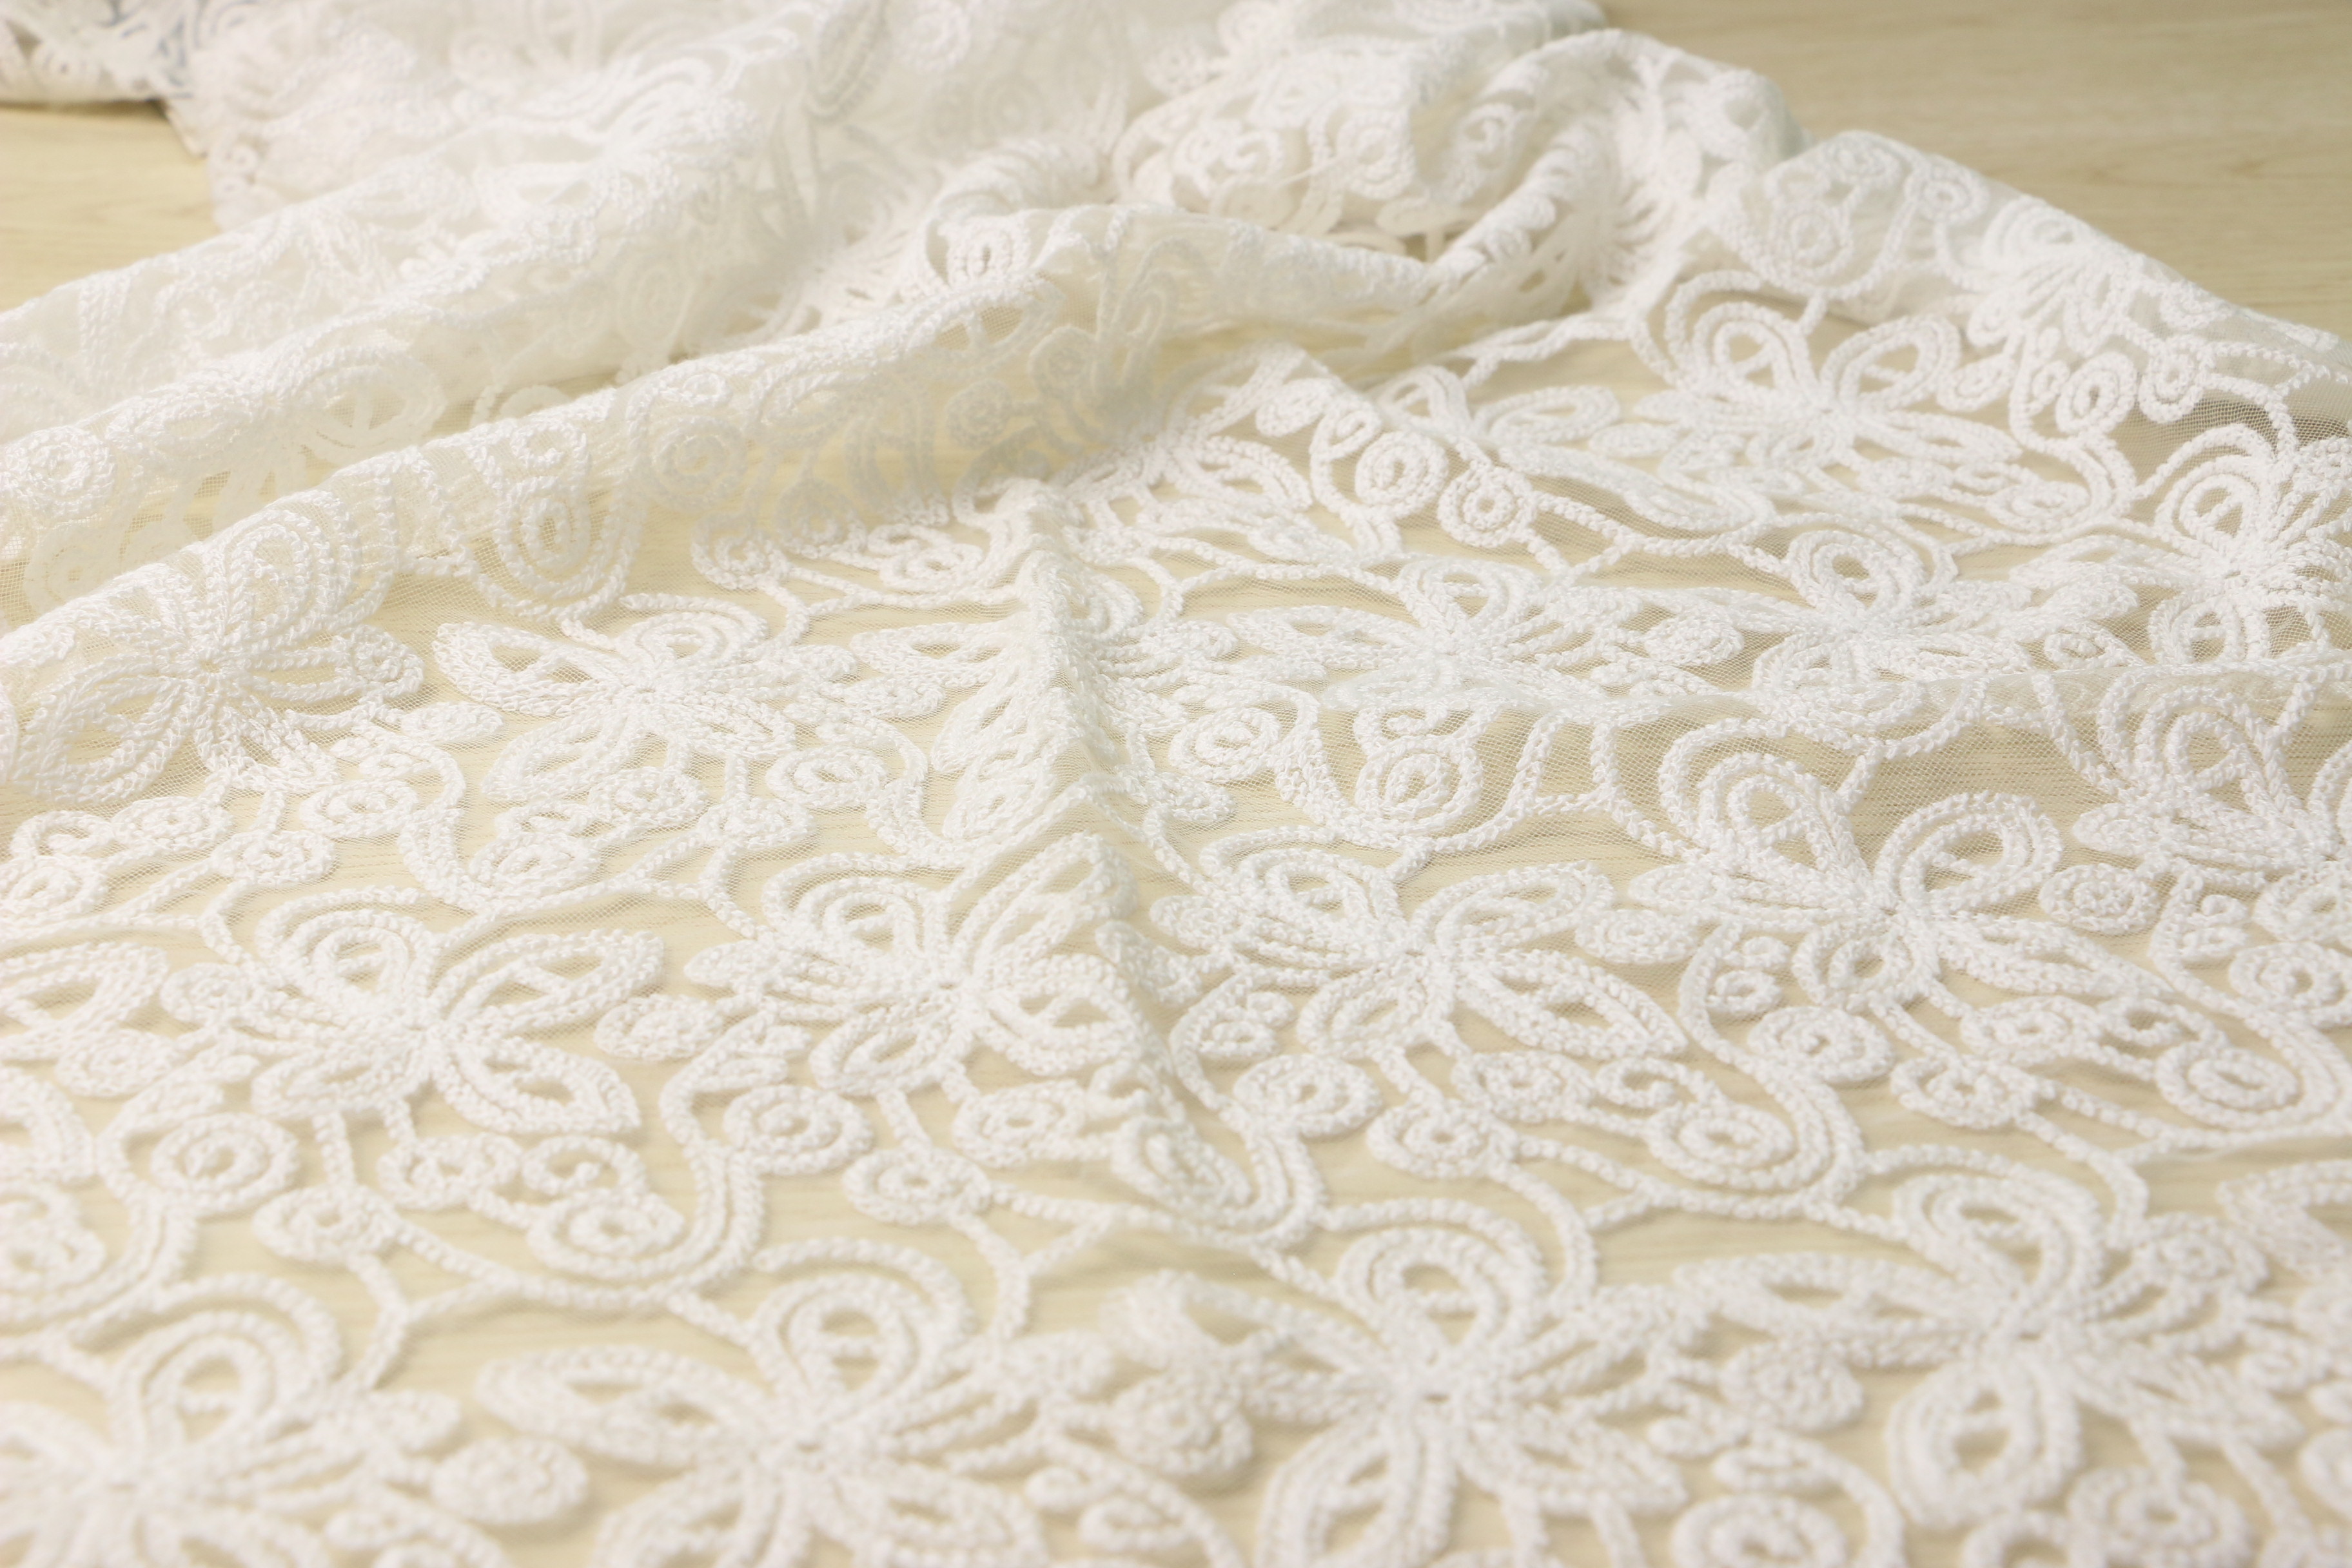  Chemical Allover Lace Fabric OEKO TEX 100 Approved Breathable OEM Available Manufactures